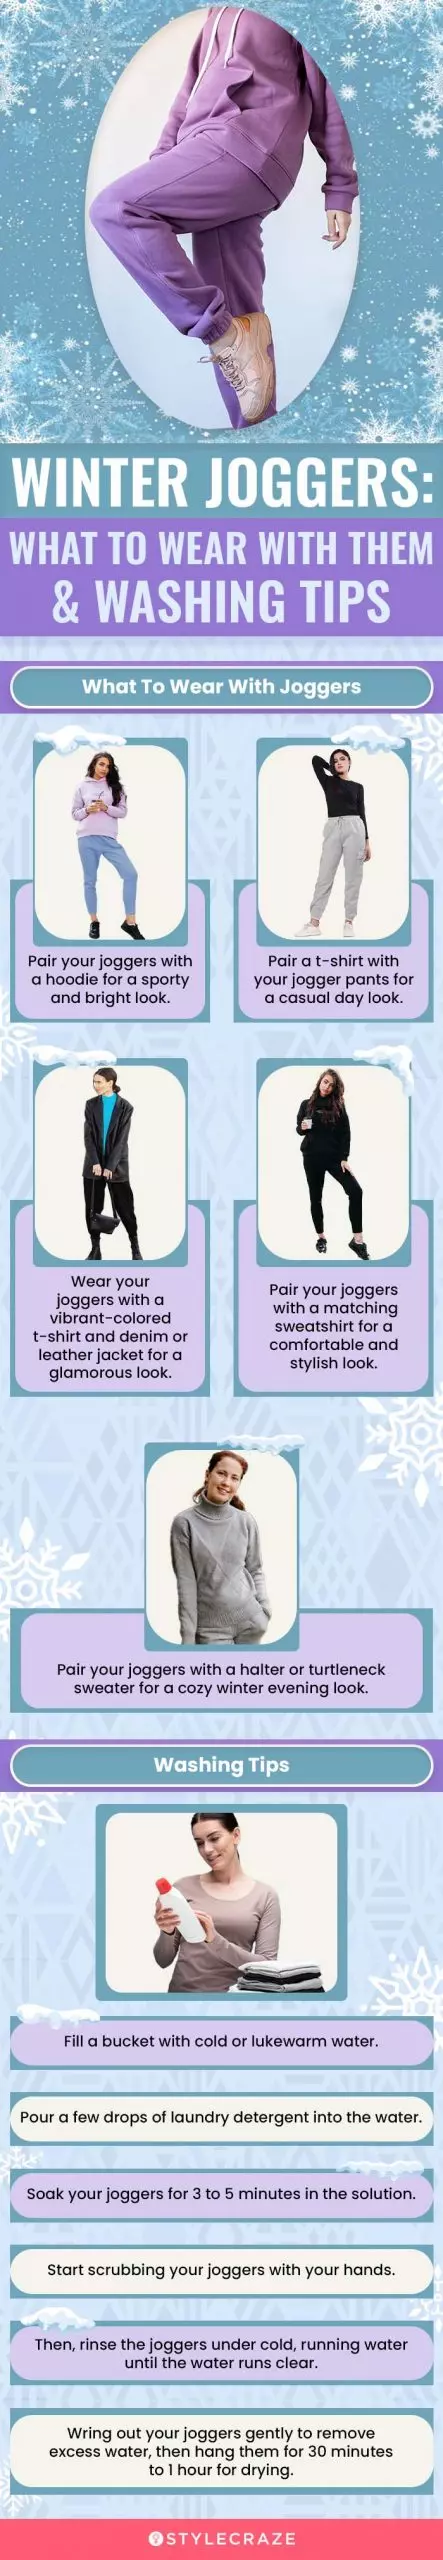 Winter Joggers: What To Wear With & Washing Tips (infographic)